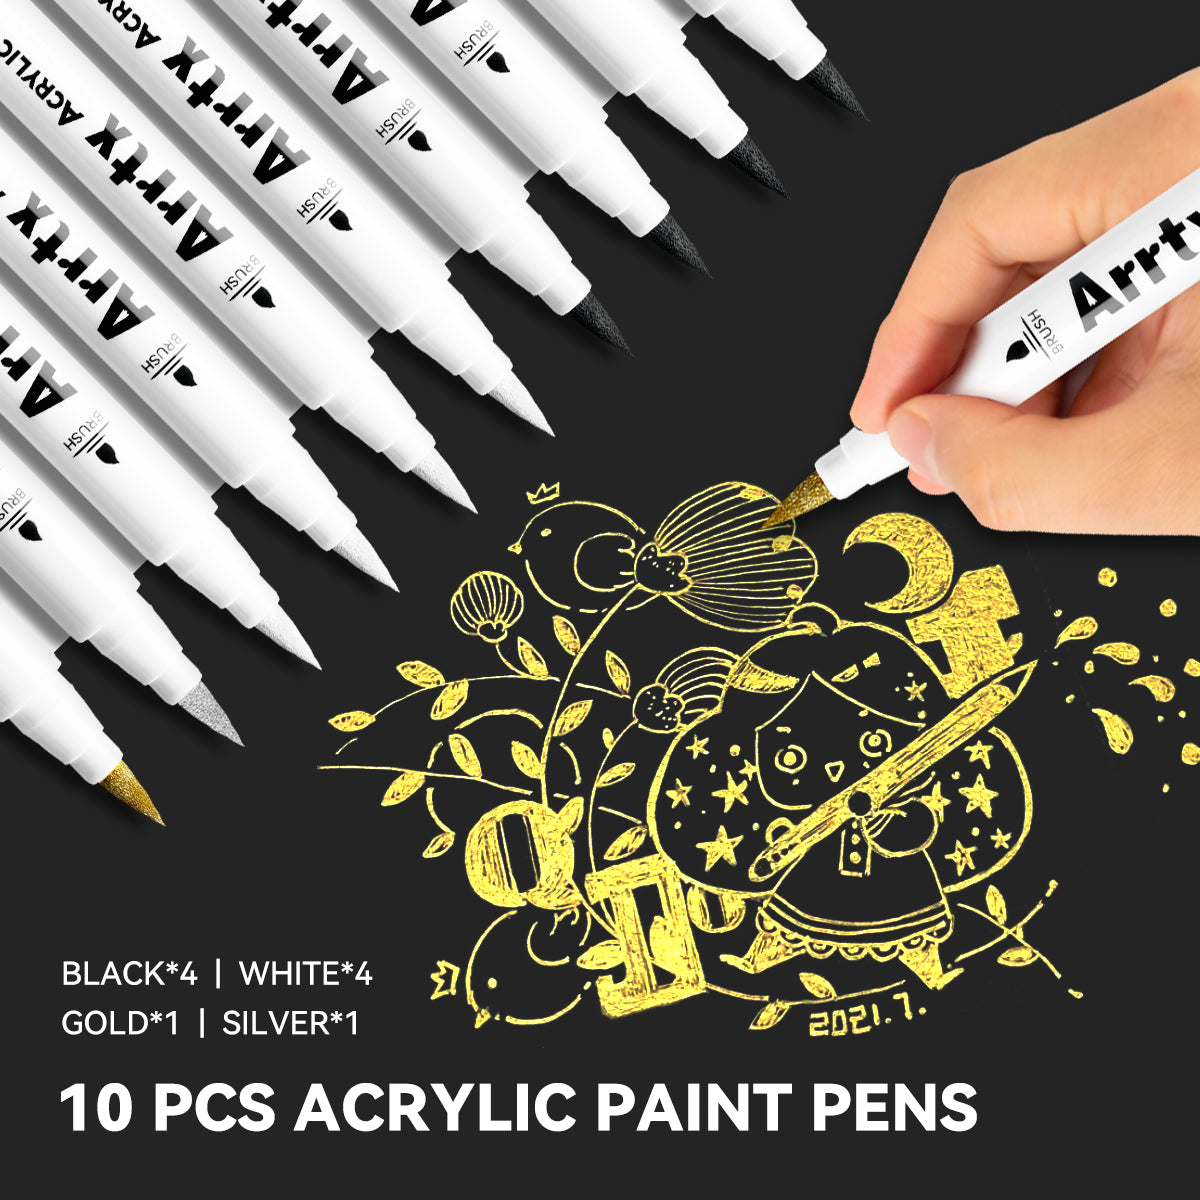 Arrtx Acrylic Paint Pens 10 Pack Extra Brush Tip White Paint Markers Metallic